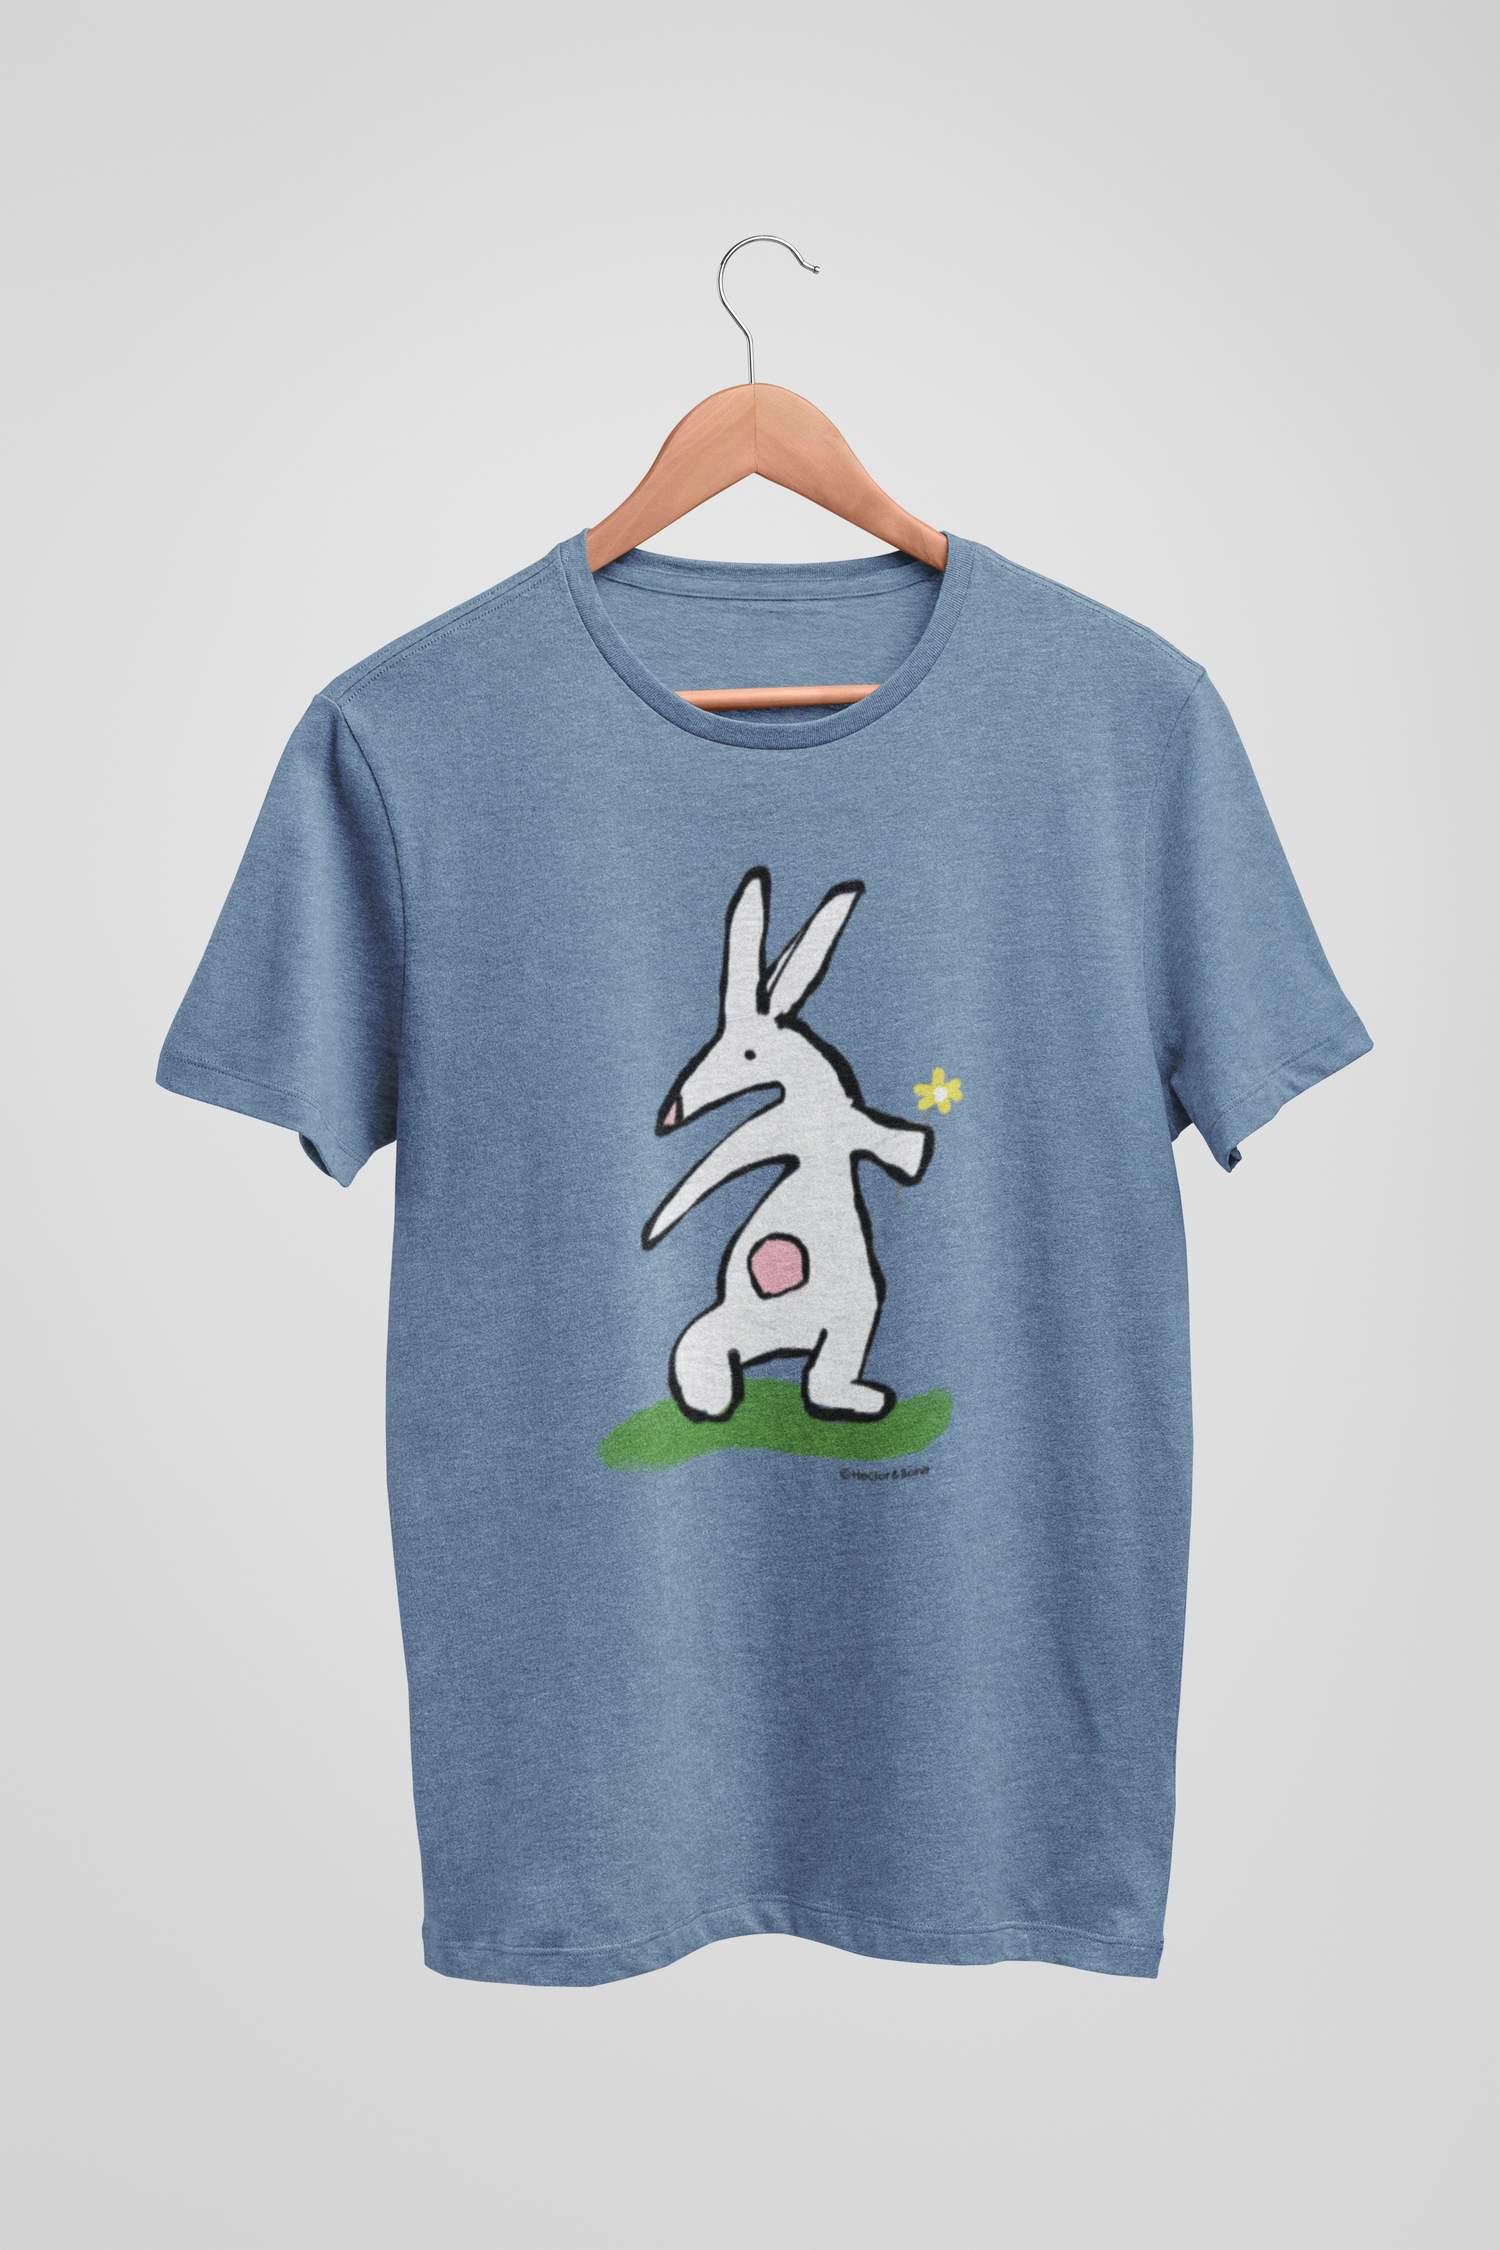 Bunny T-shirt - Illustrated rabbit holding a flower design on mid heather blue vegan cotton - Easter Bunny t-shirts by Hector and Bone